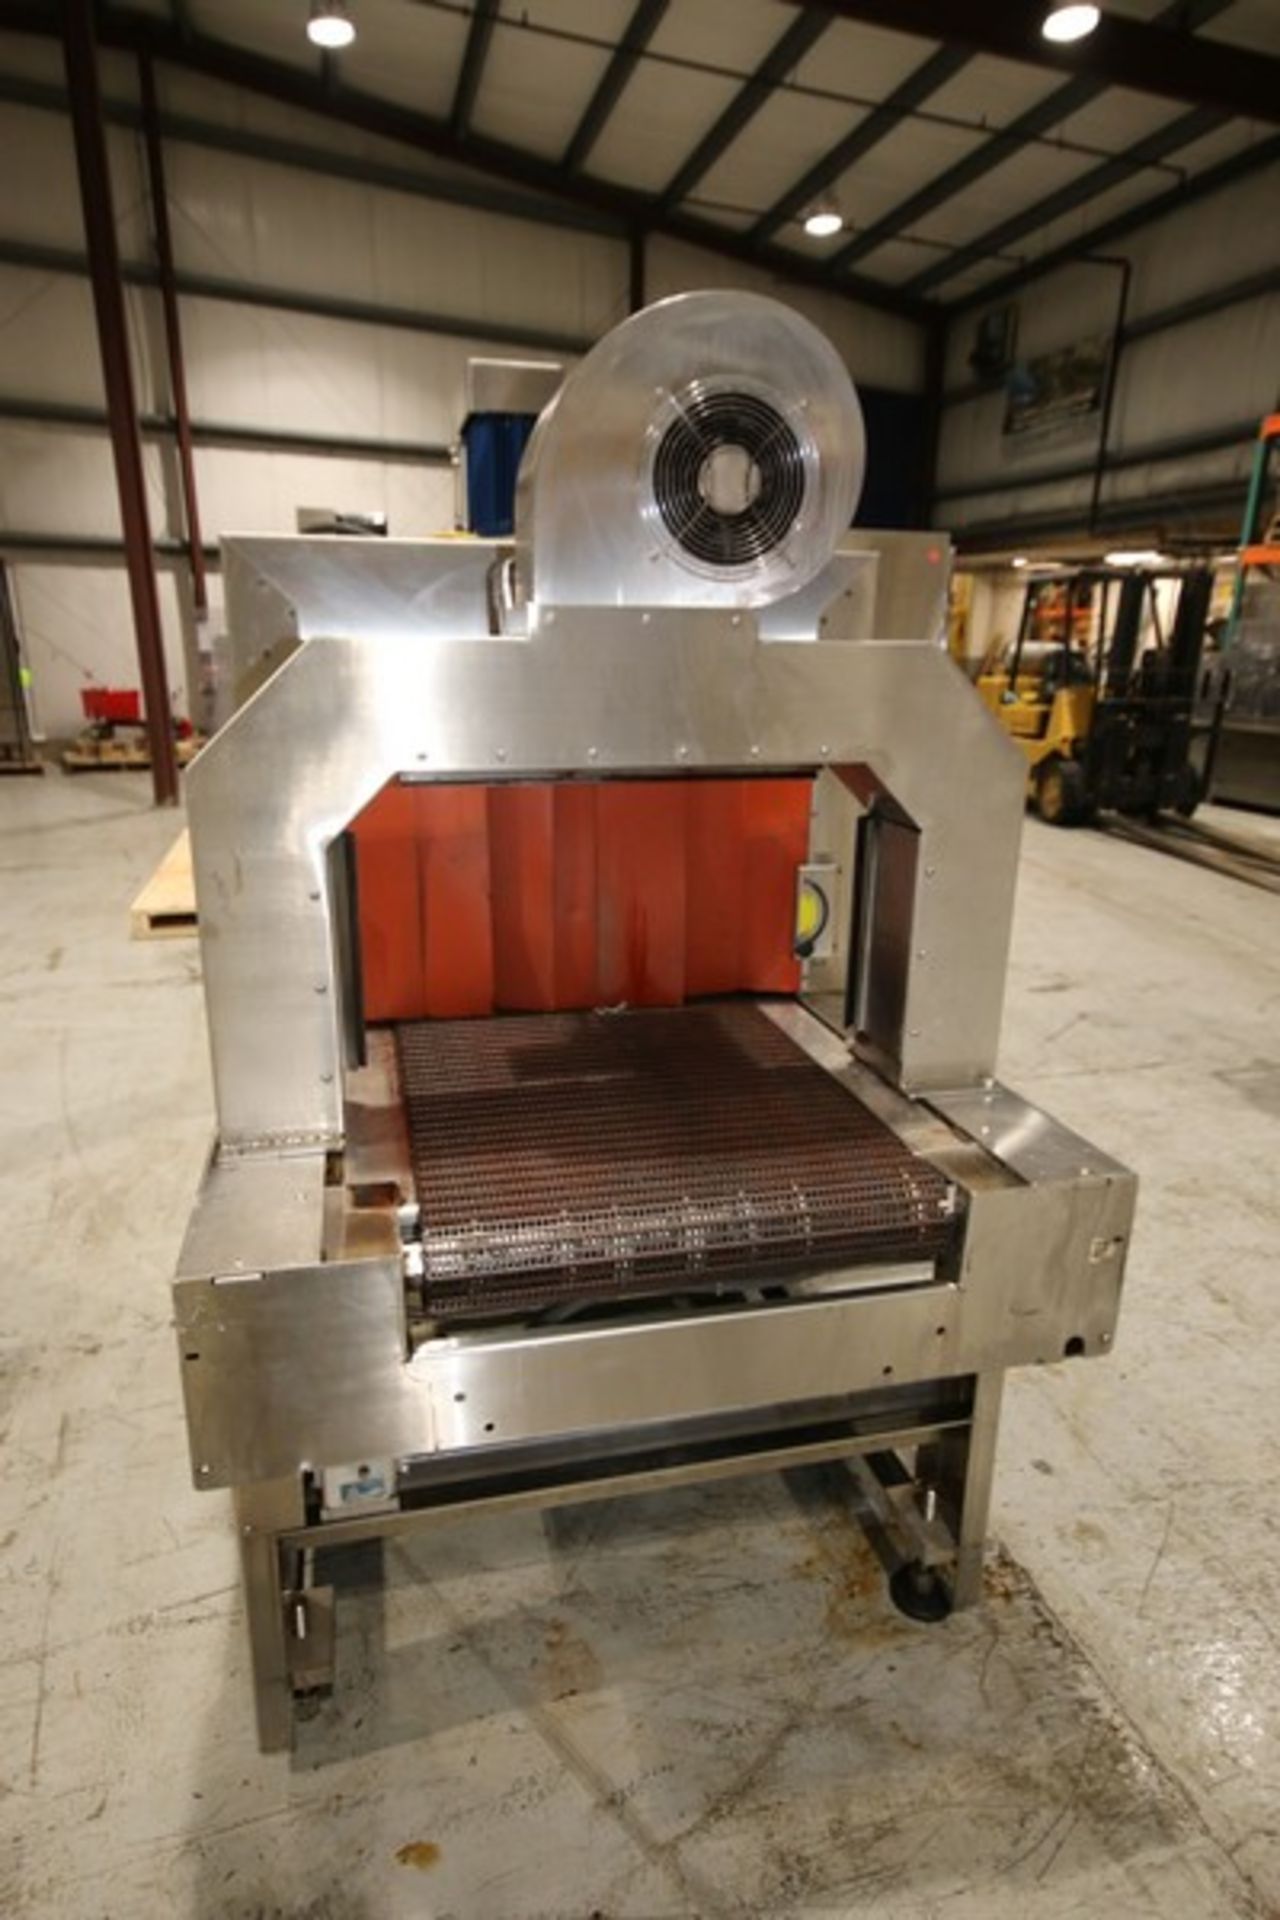 Arpac S/S Shrink Wrapper/Bundler, Model 55TW-24SS, SN 4934, with 16" H Product Height, 2" W Belt, - Image 3 of 14